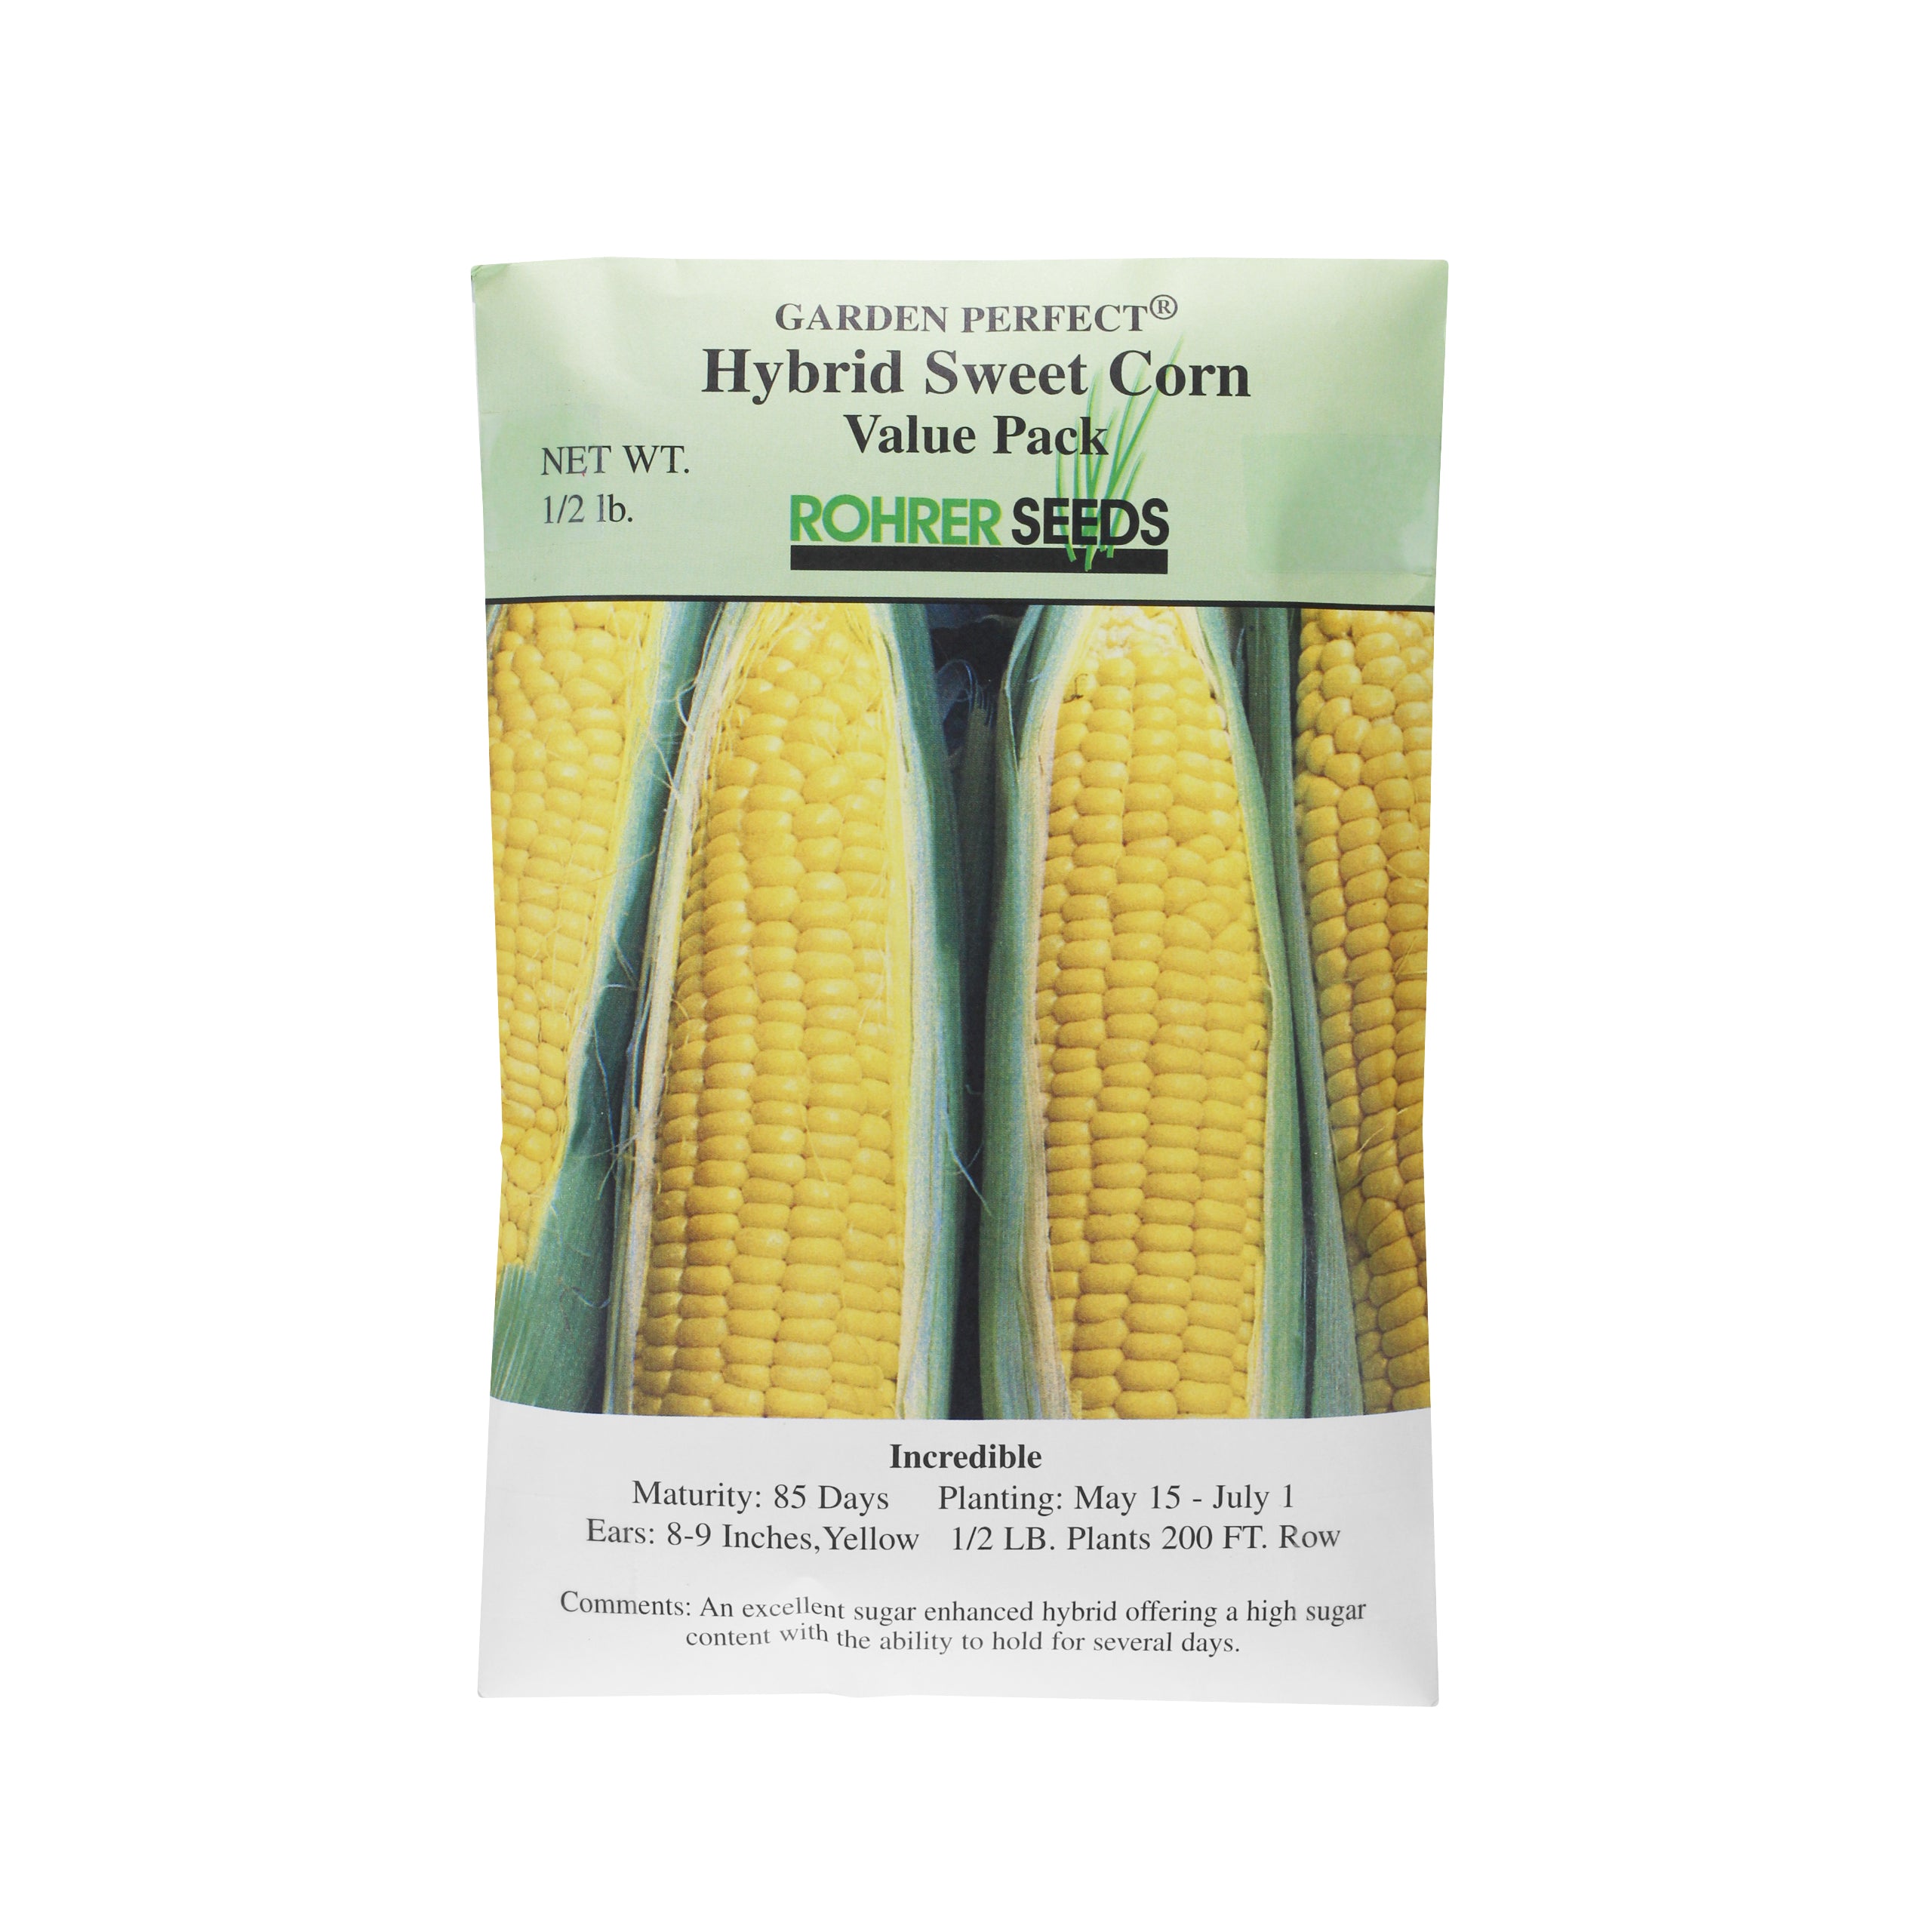 Rohrer Seeds Incredible Hybrid Sweet Corn Value Pack, 0.5lb Packet, Plants 200ft Row